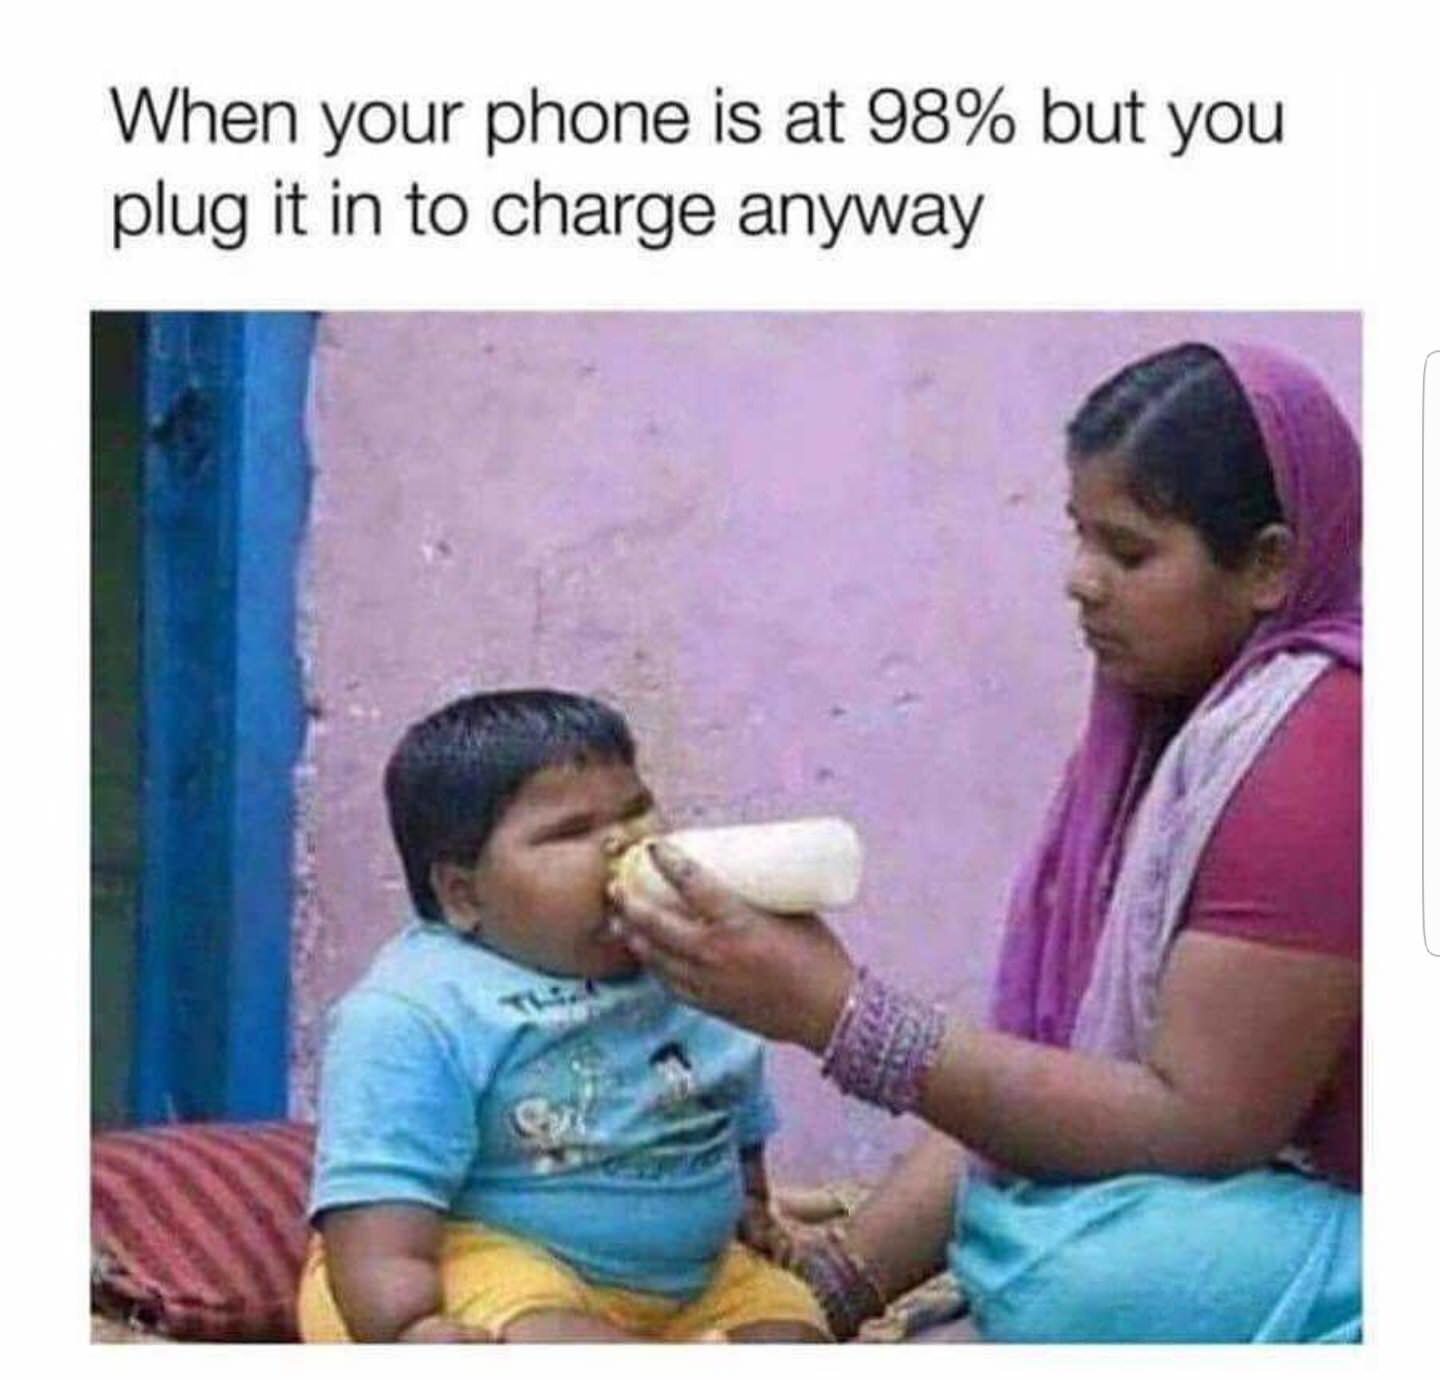 your phone is at 98% but you plug it in anyway - When your phone is at 98% but you plug it in to charge anyway